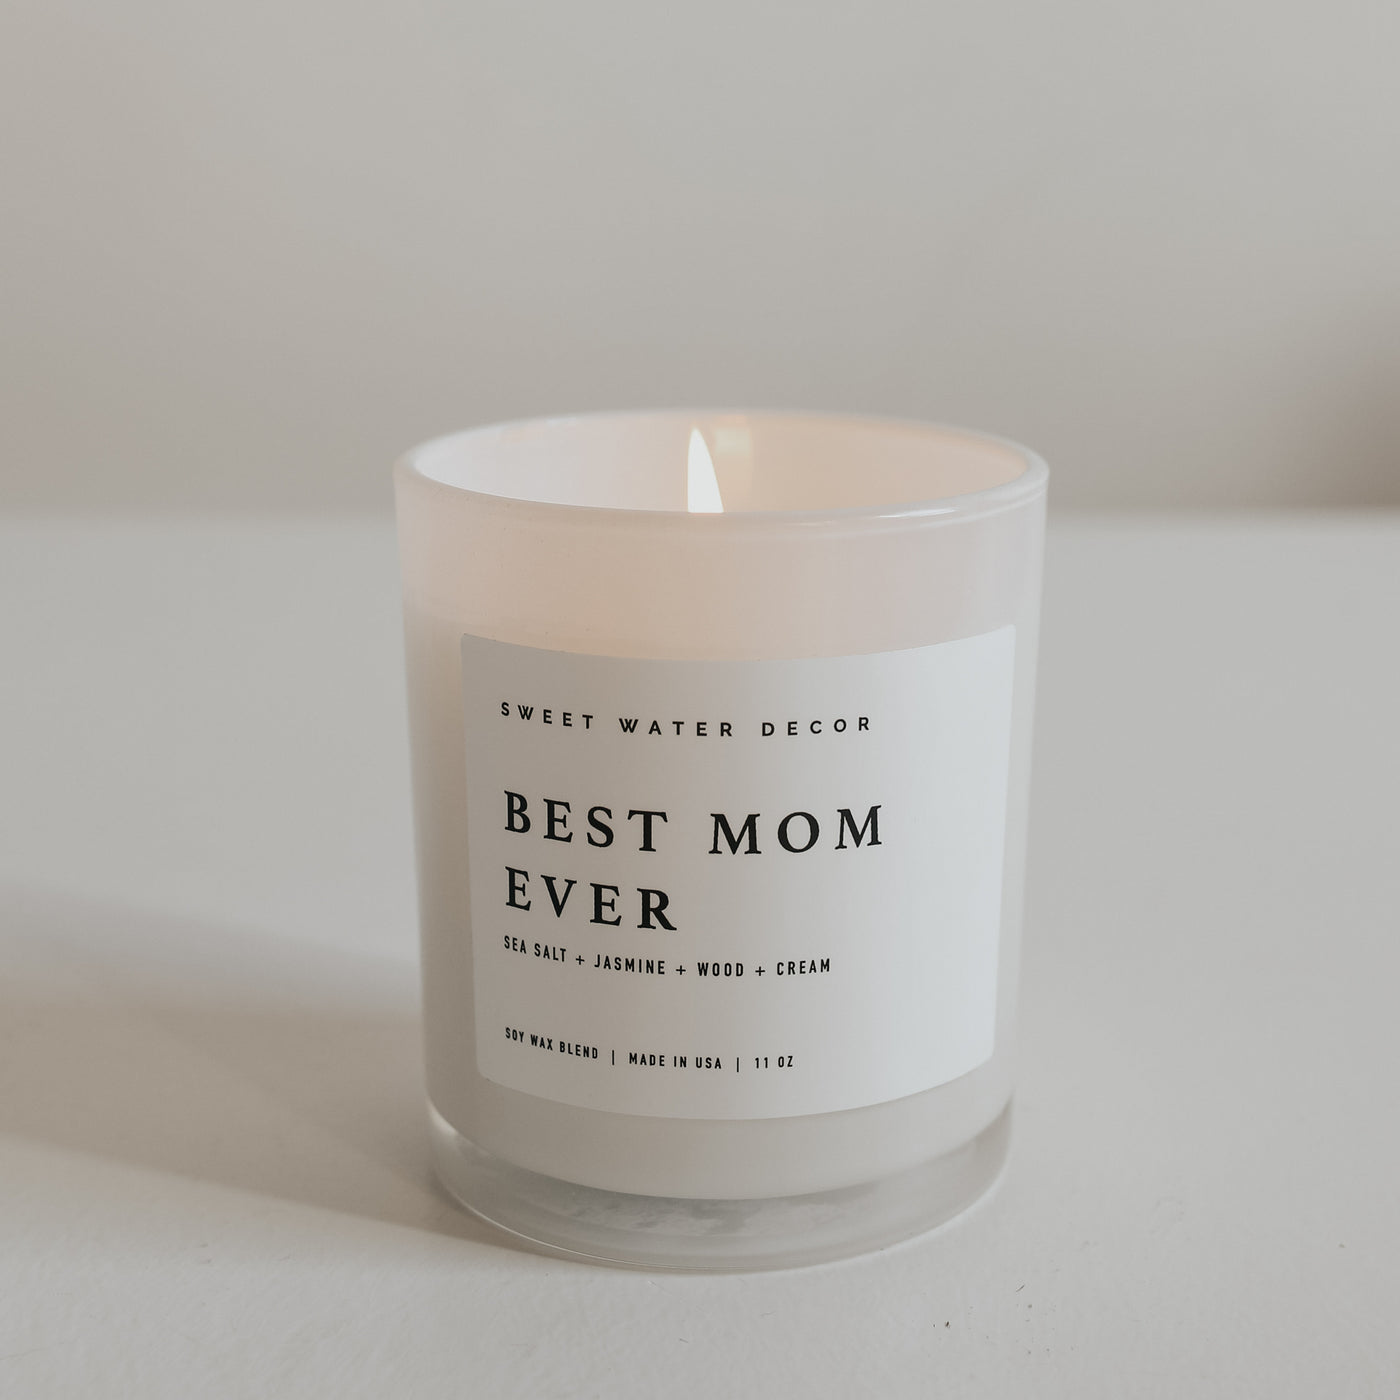 Best Mom Ever! Soy Candle - White Jar - 11 oz - Sweet Water Decor - Candles